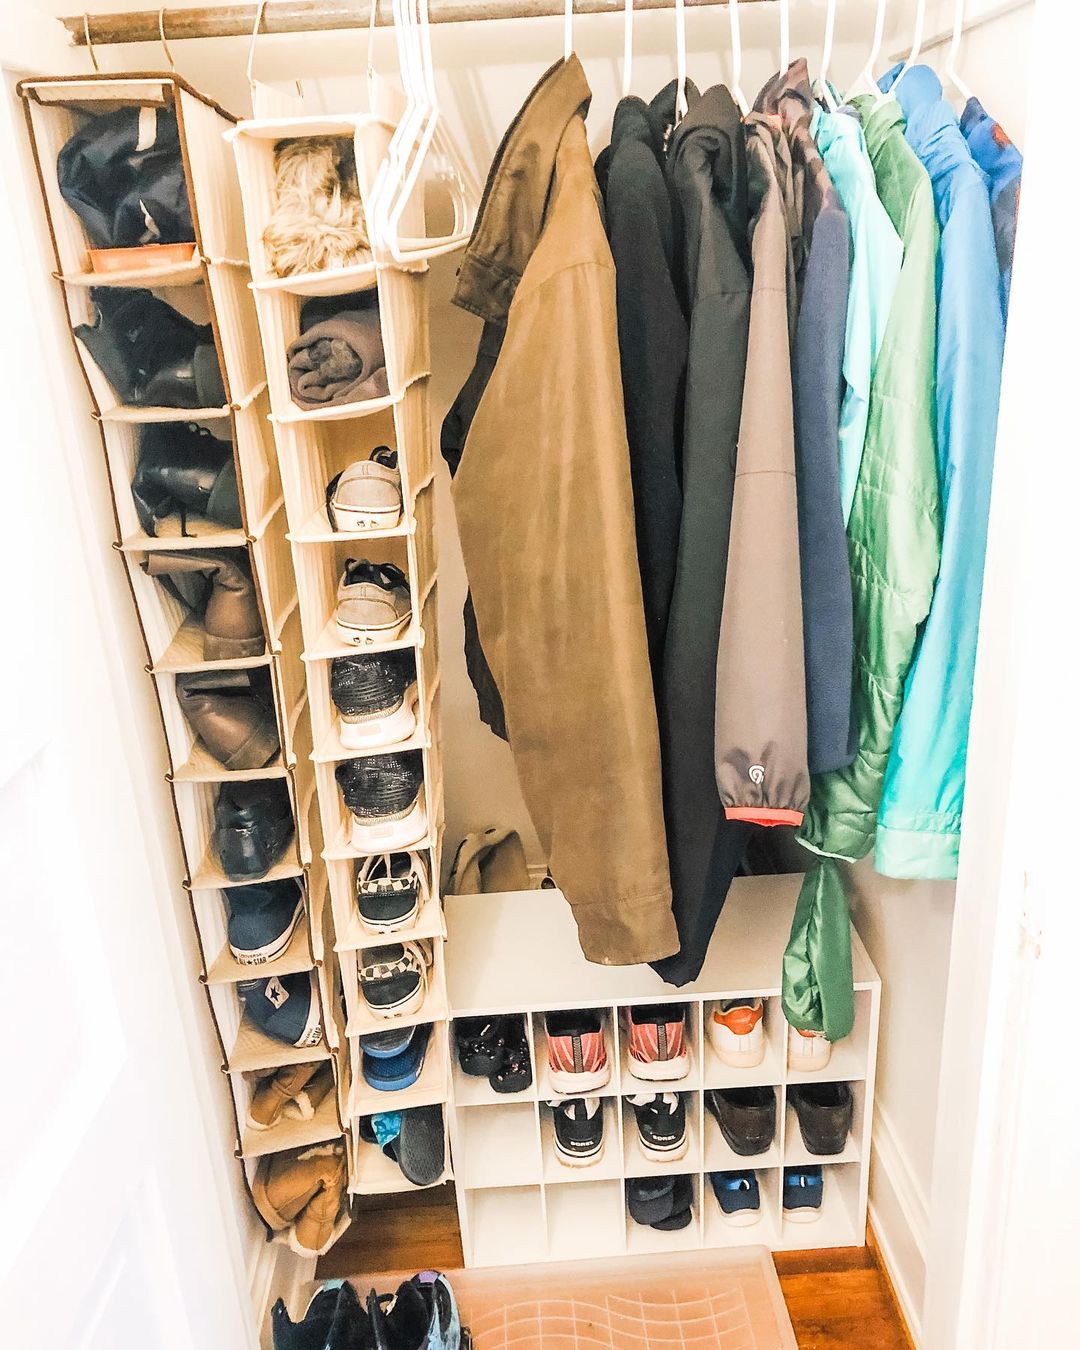 https://www.extraspace.com/blog/wp-content/uploads/2020/12/shoe-storage-ideas-save-space-with-hanging-shoe-organizer.jpg